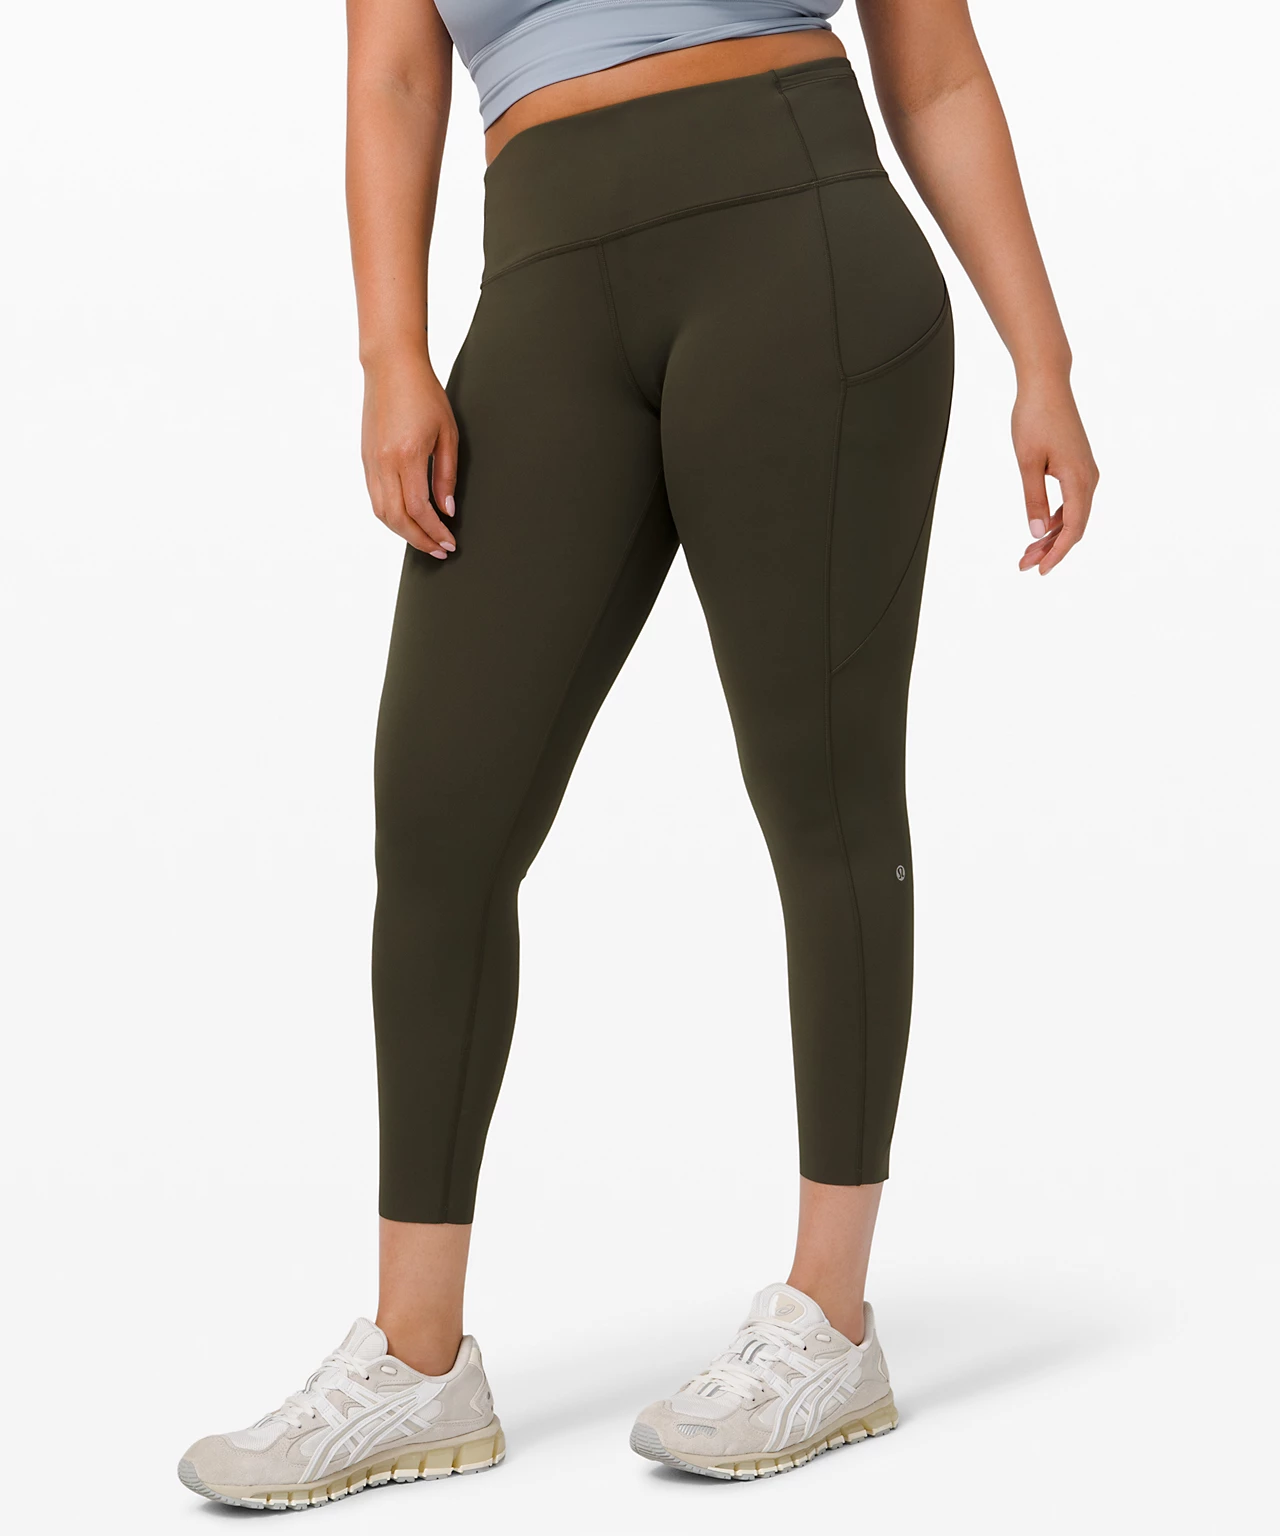 Does Lululemon Have Plus Sizes In Store